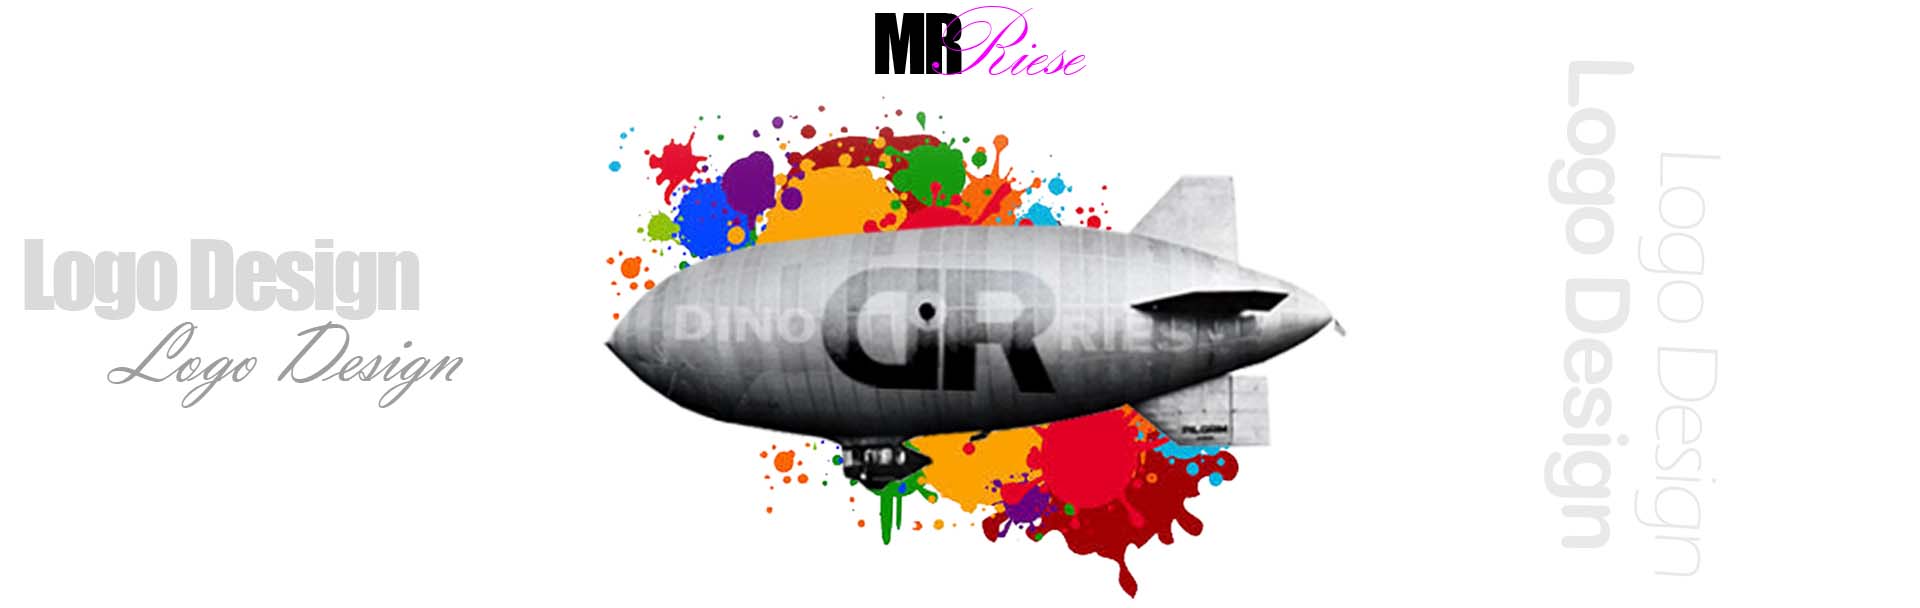 Logo Design Project Photoshop Project | Mr. Riese - image